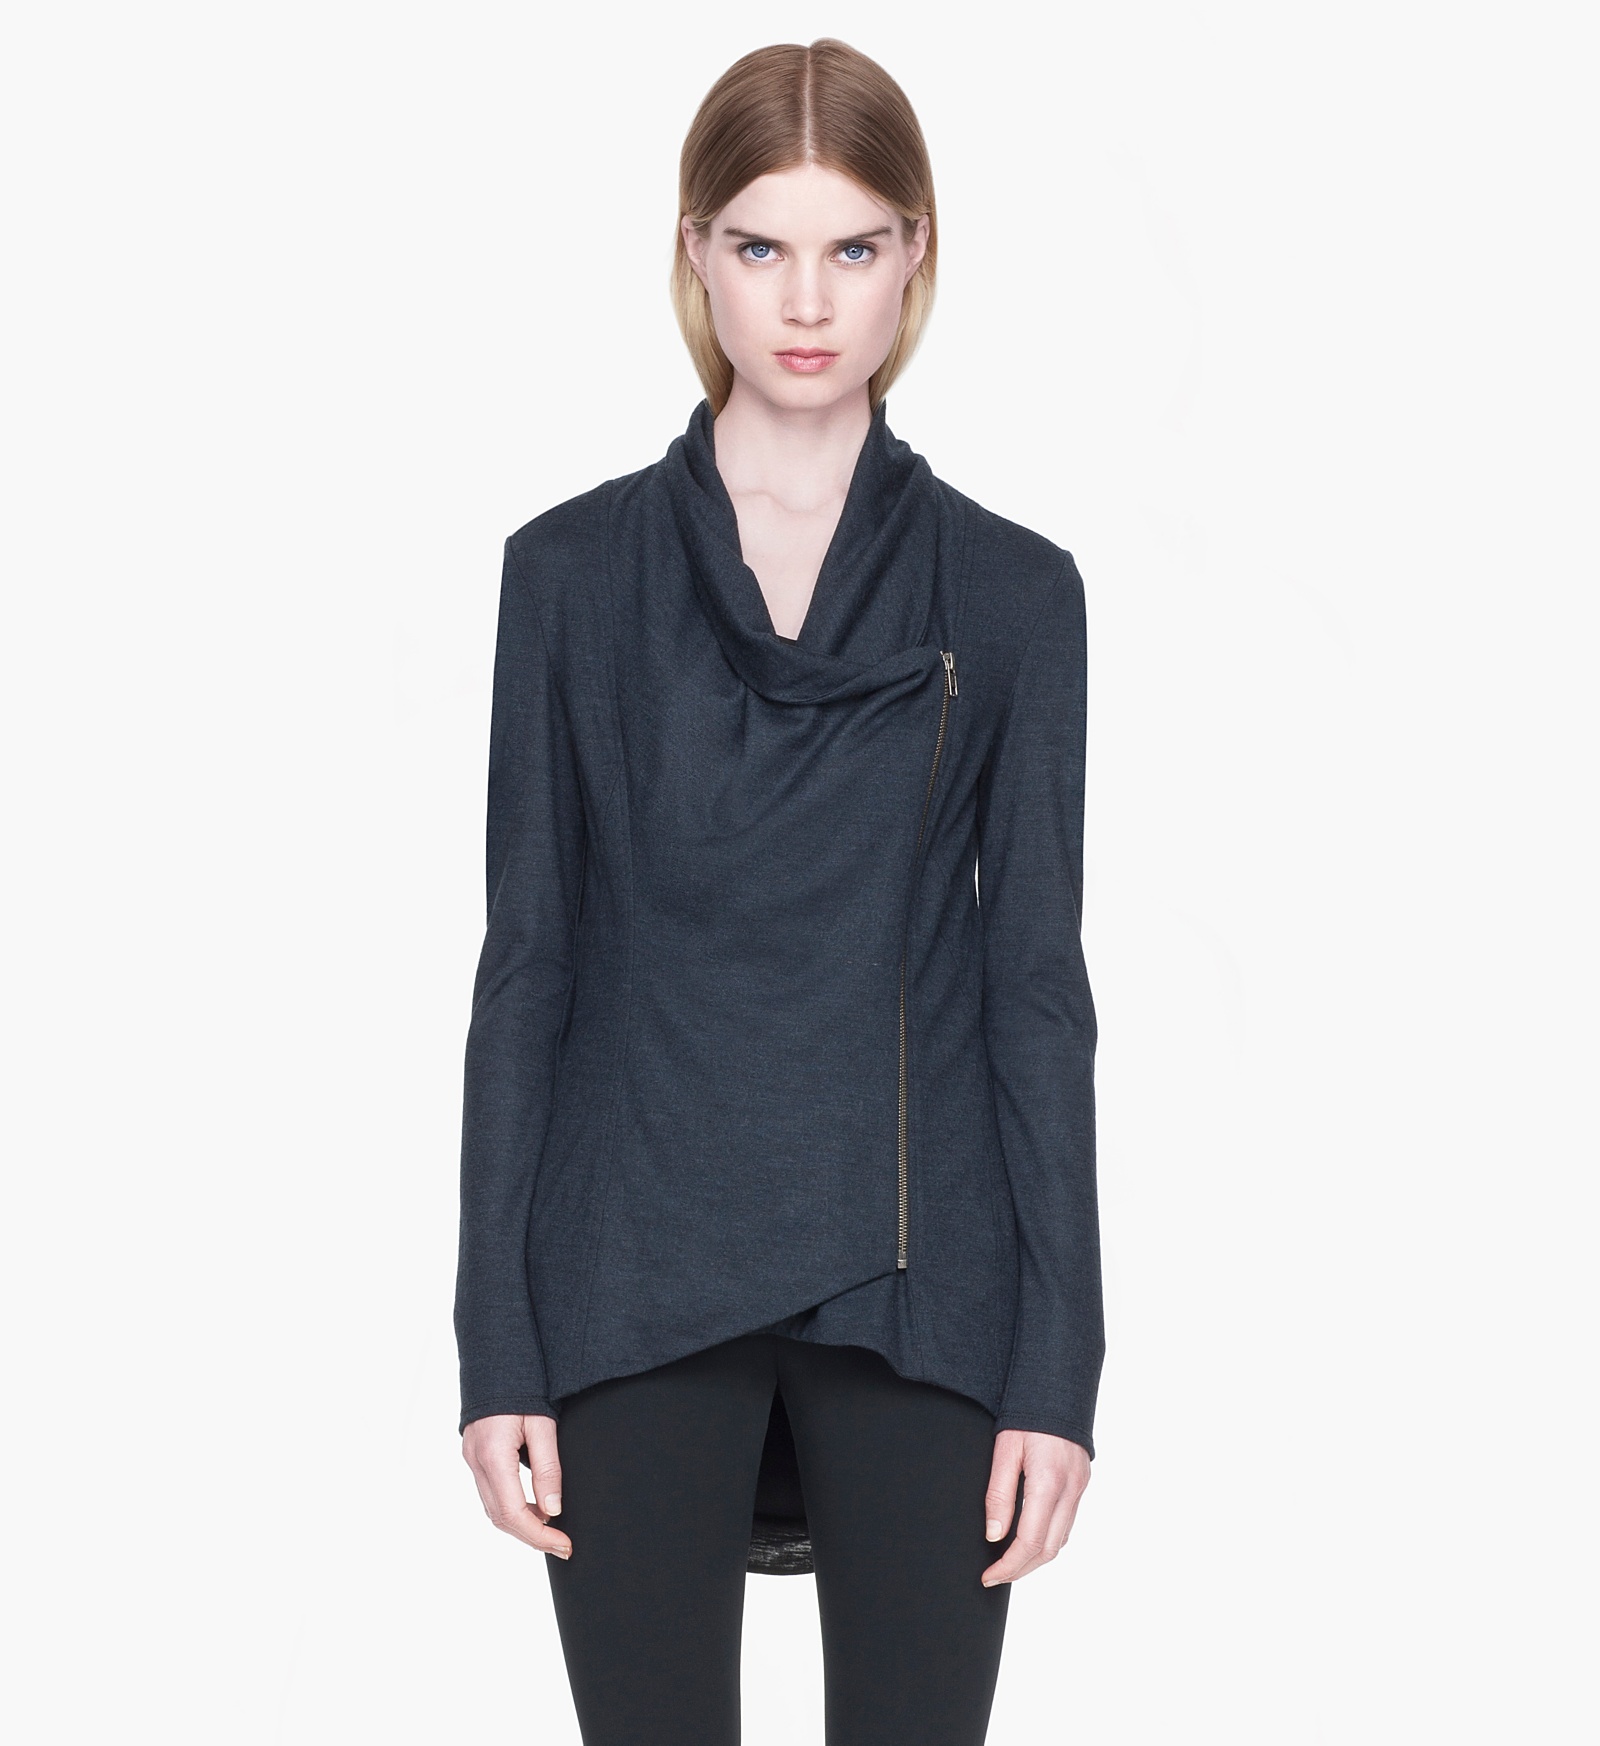 Shop Helmut Lang on A Few Goody Gumdrops and Get 25% Off! - A Few Goody ...